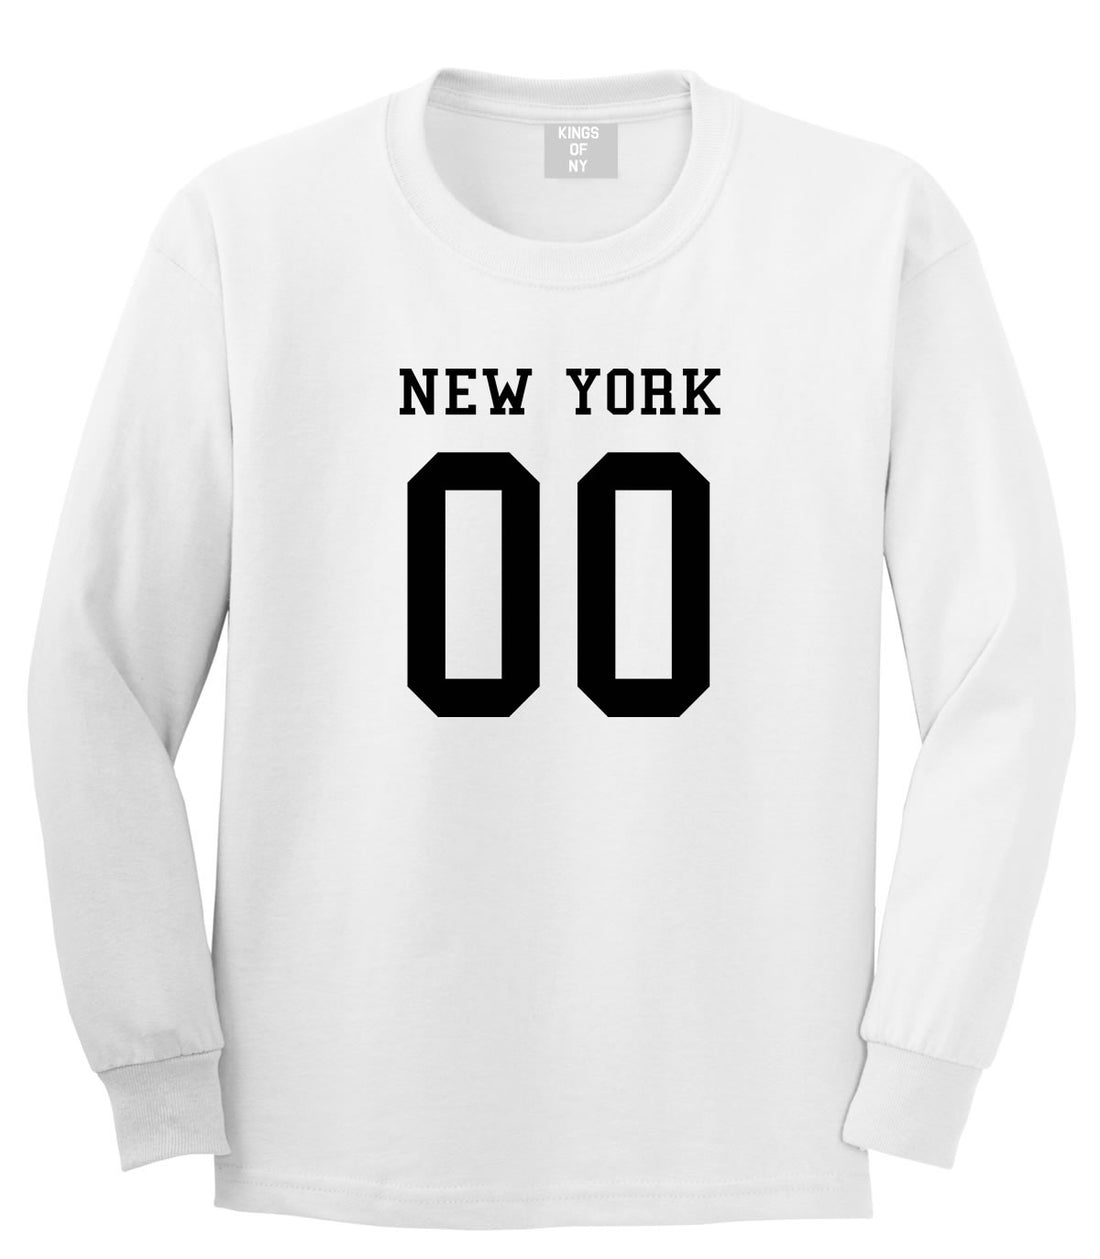 New York Team 00 Jersey Long Sleeve T-Shirt in White By Kings Of NY